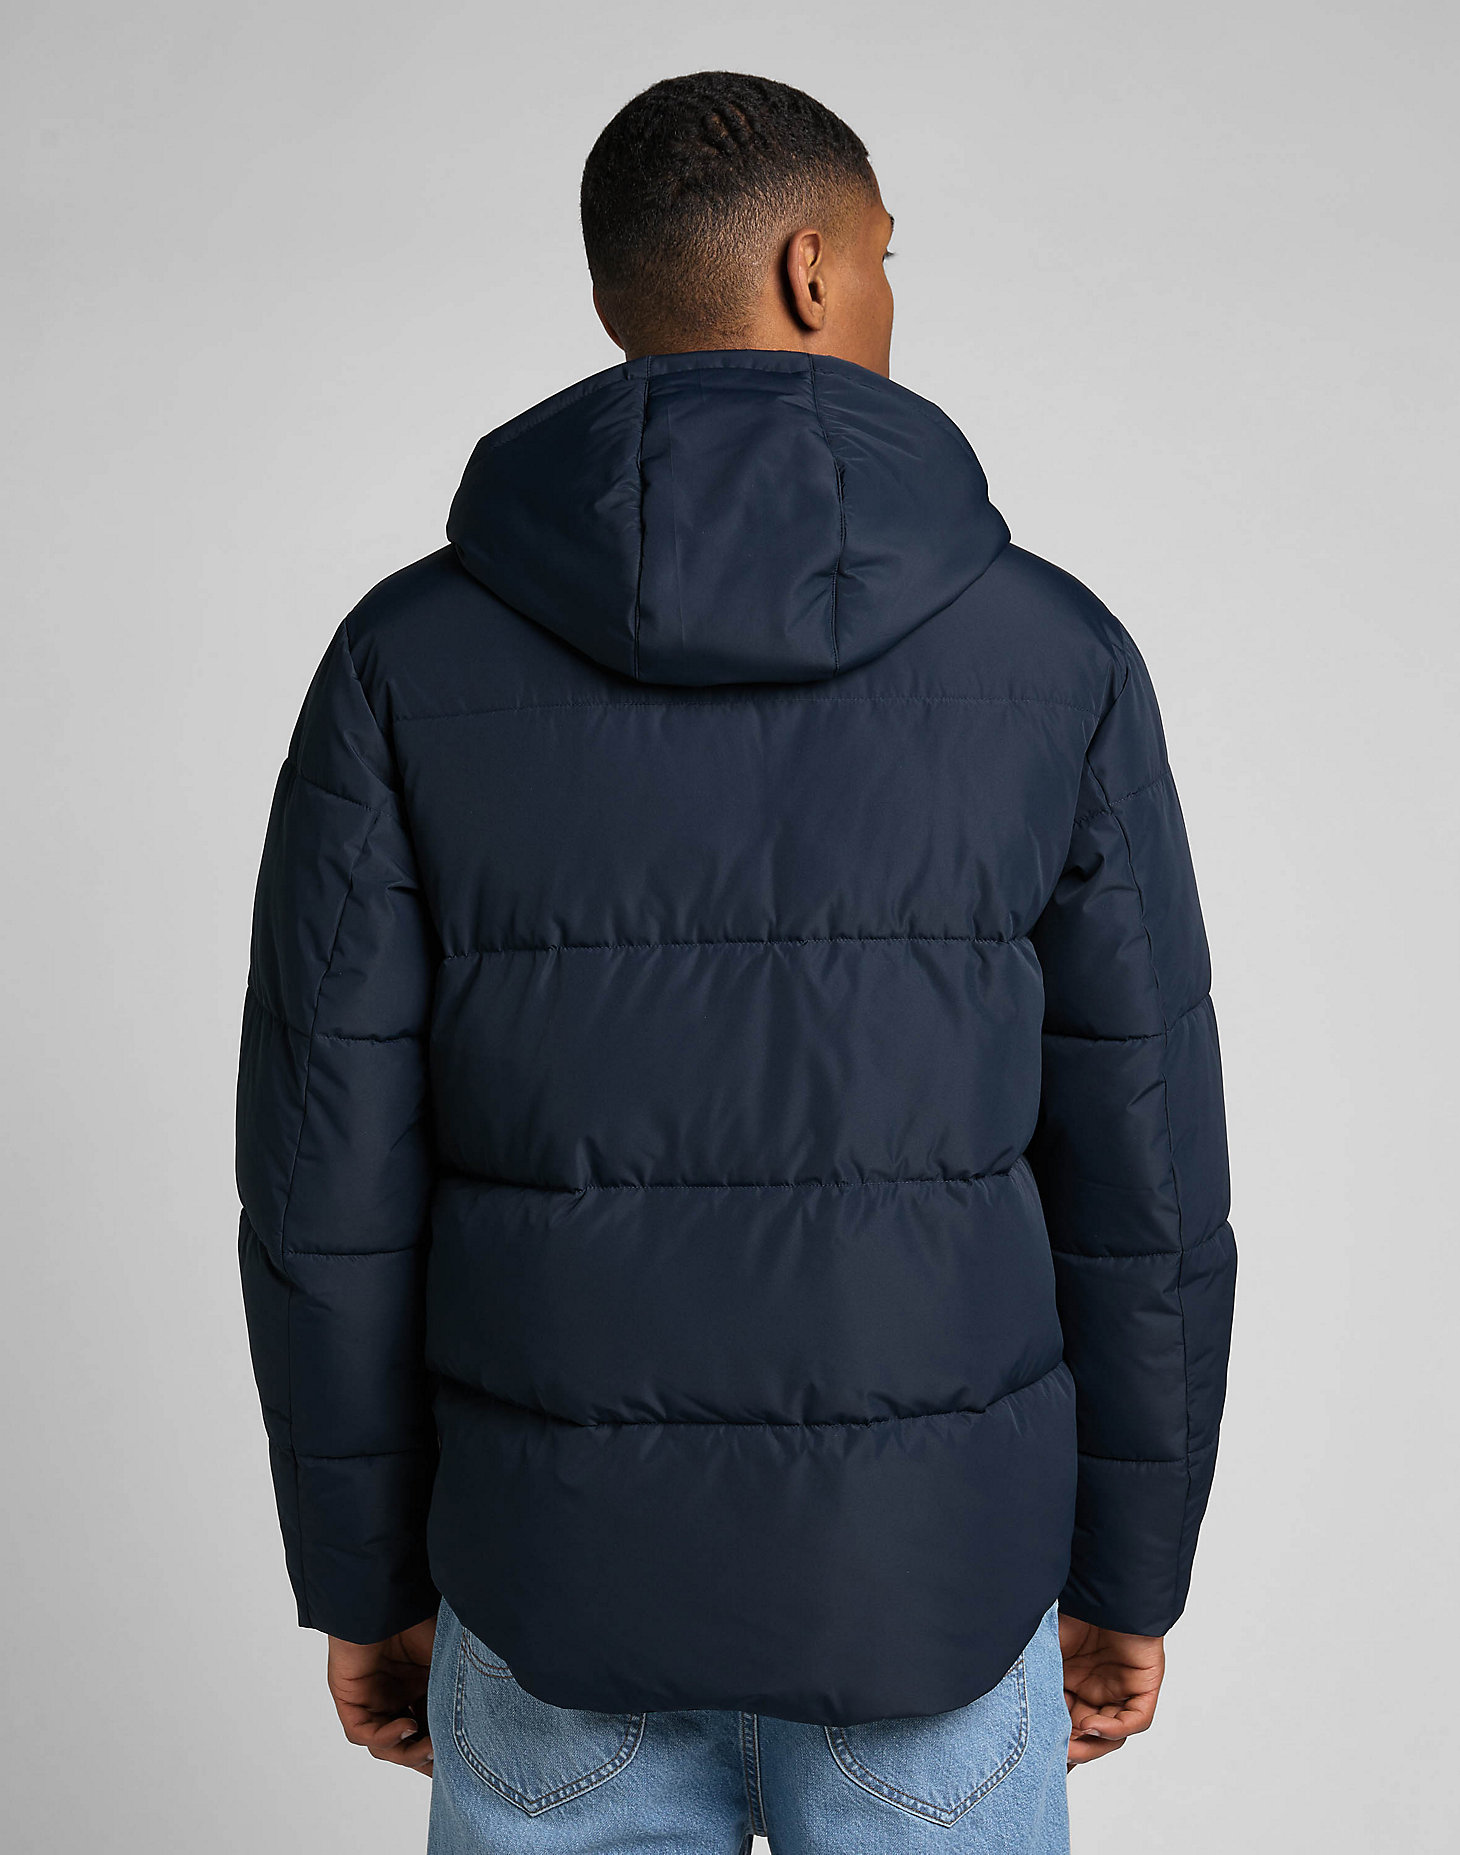 Puffer Jacket in Sky Captain alternative view 1